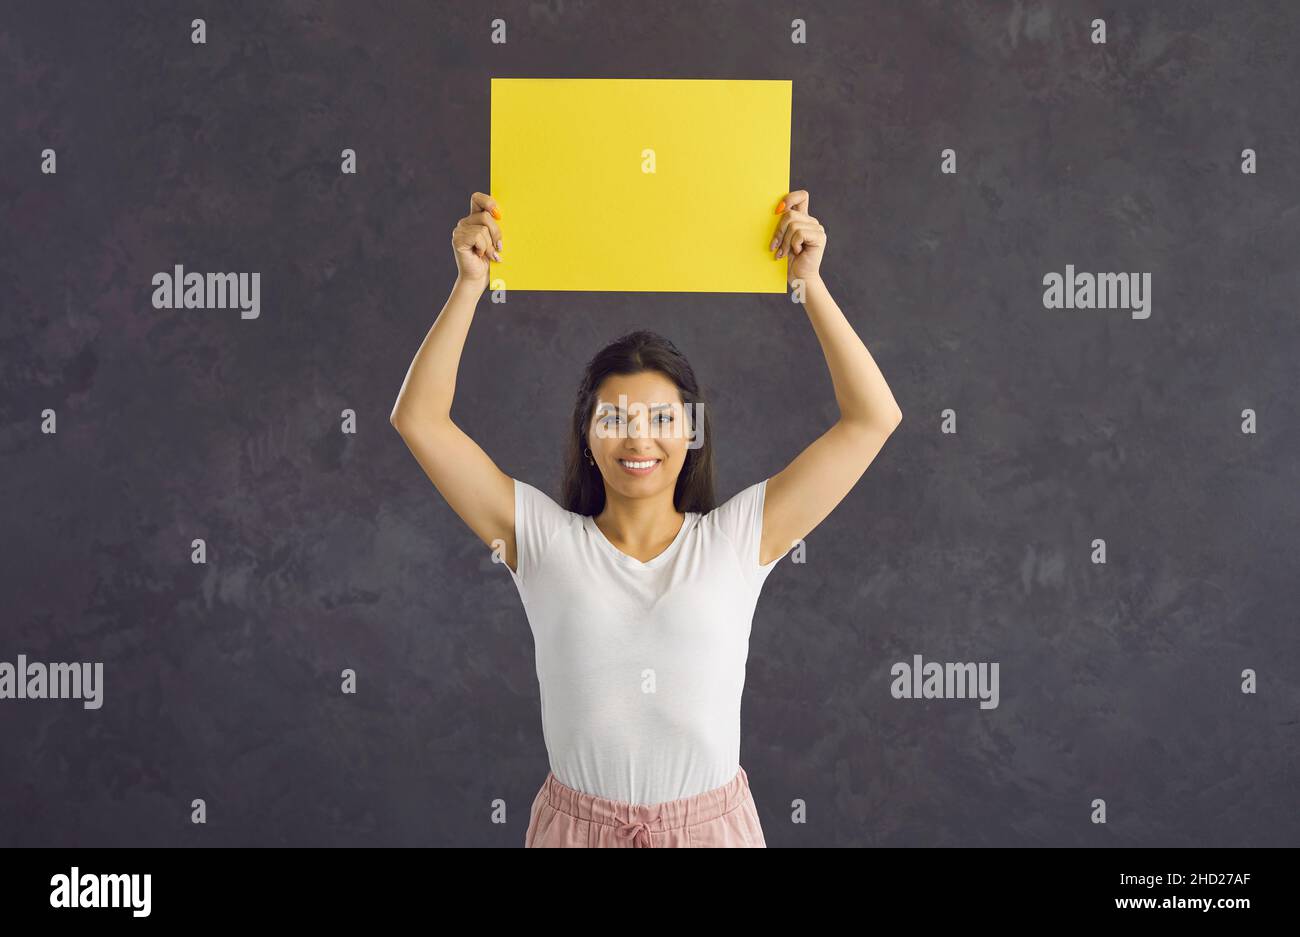 Positive joyful woman standing on gray background holding blank yellow sheet of paper for text. Stock Photo